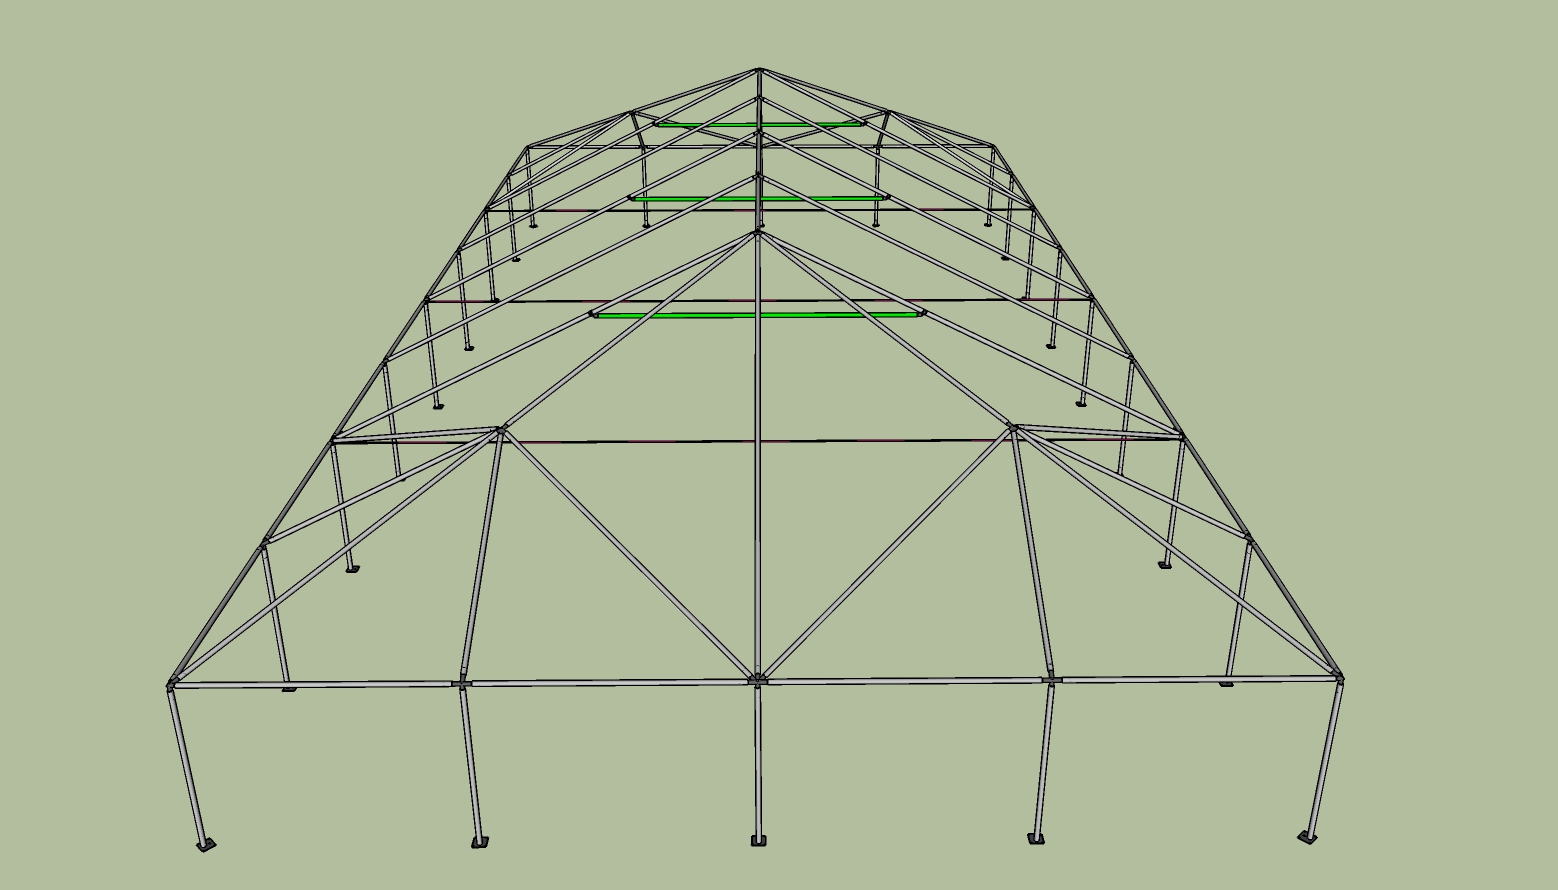 40x80 frame tent side view